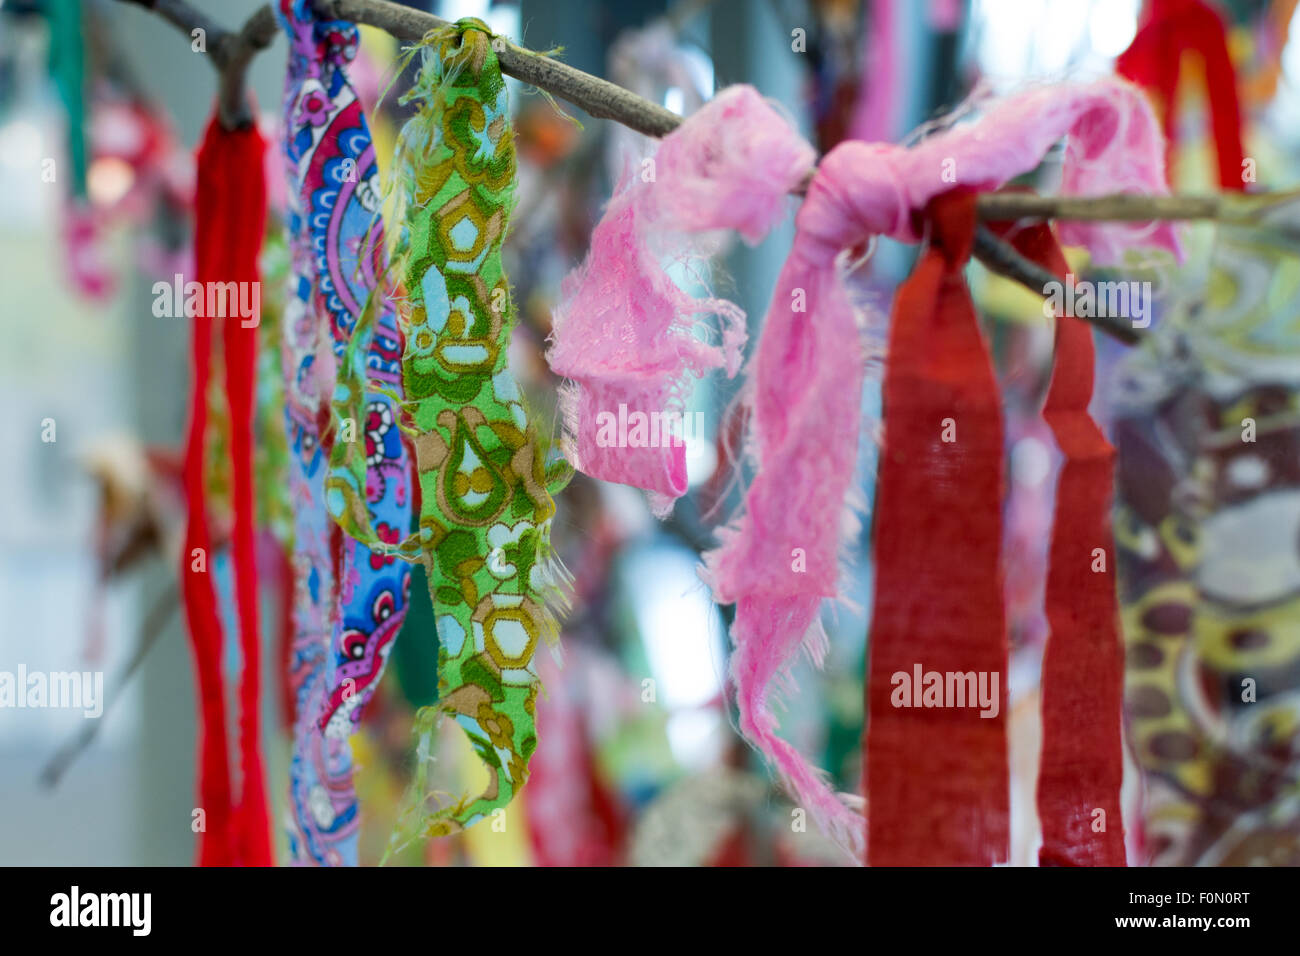 Bright cloth rags tied to a tree branch Stock Photo